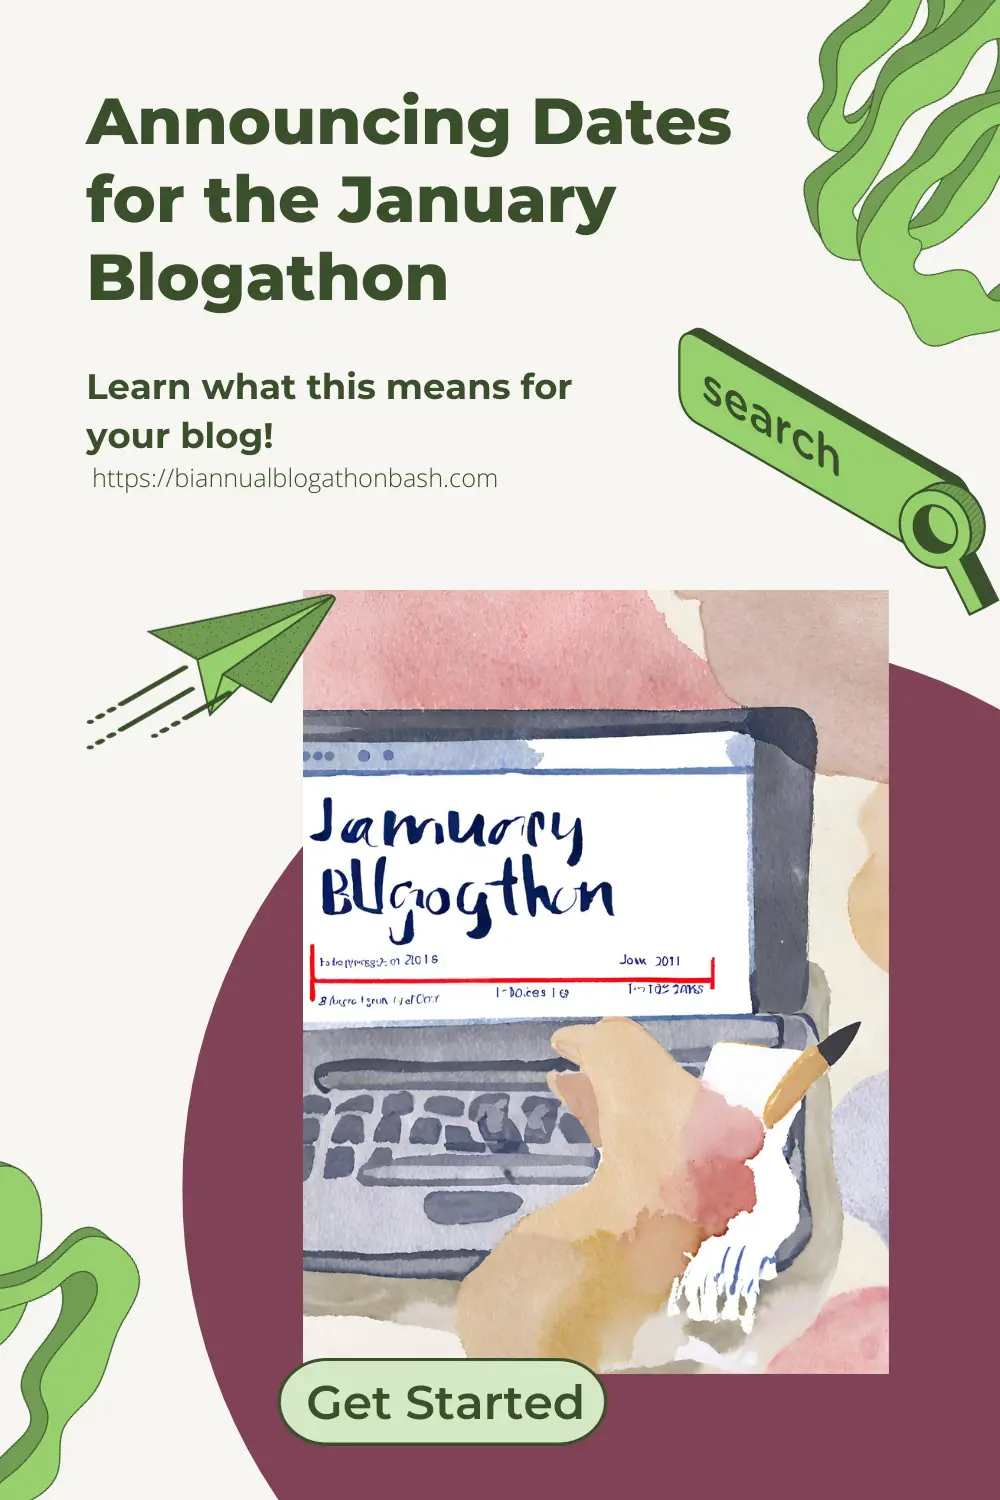 Join the January Blogathon 2024 for a four-day blogging extravaganza! Set goals, optimize content, and build your community.